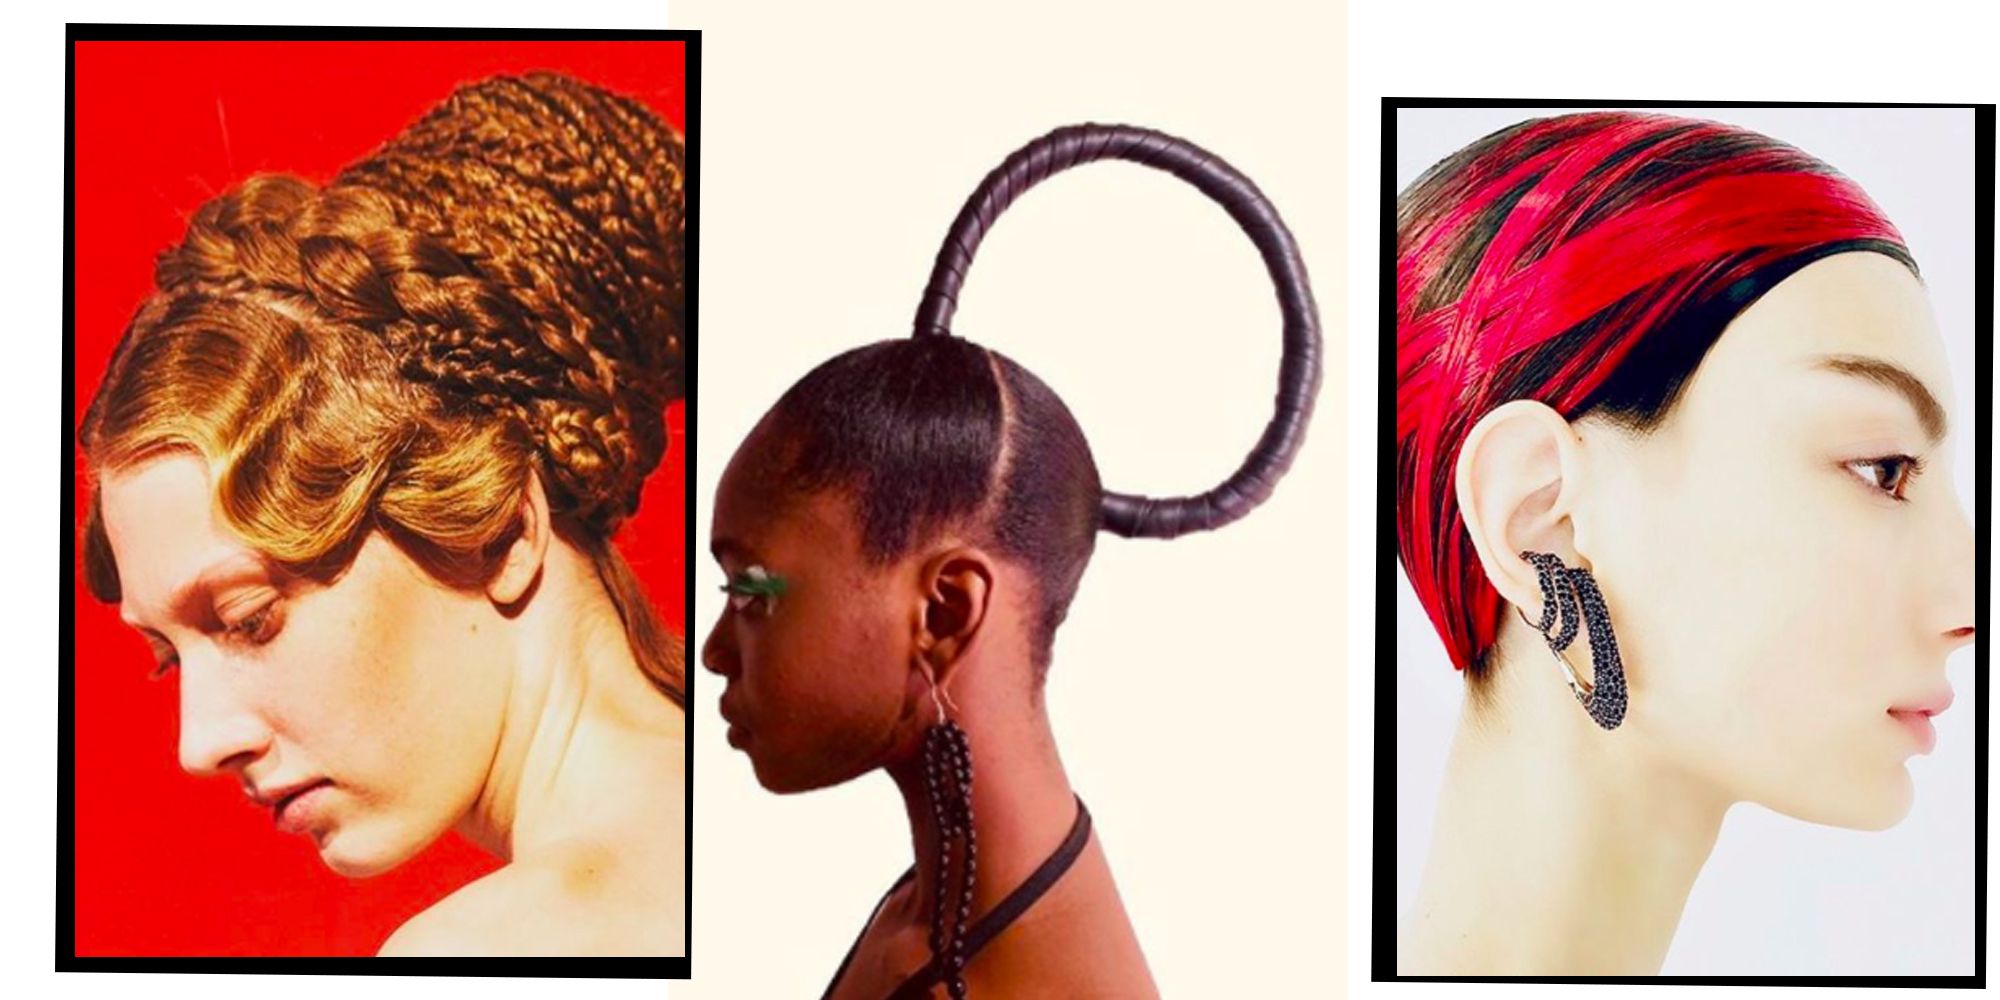 15 Legendary Hairstylists To Follow On Instagram For Seriously Iconic Inspo